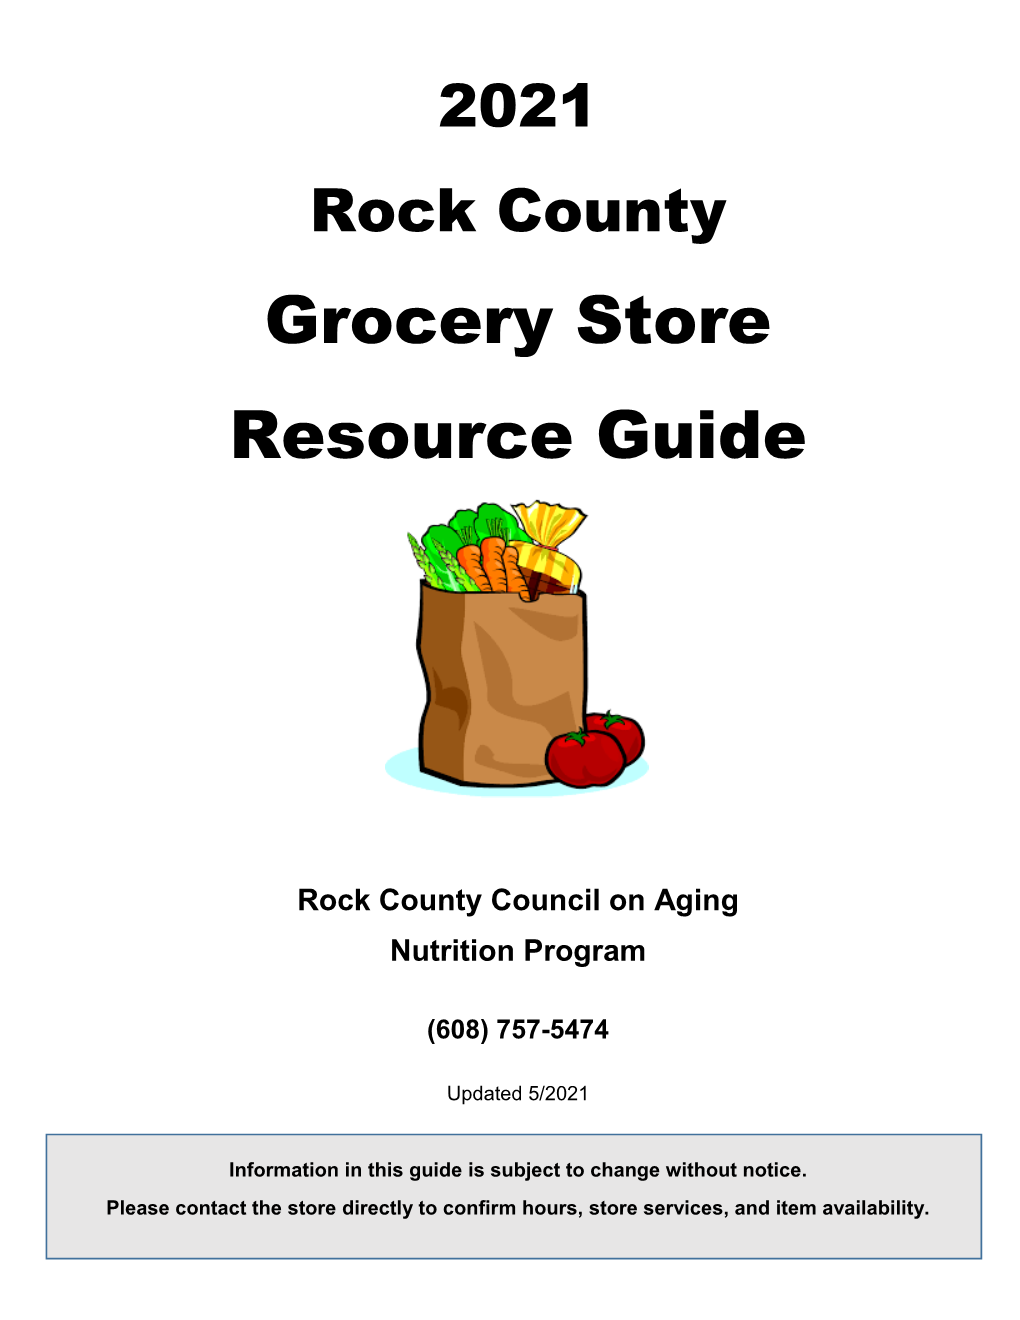 2021 Grocery Store Resource Guide